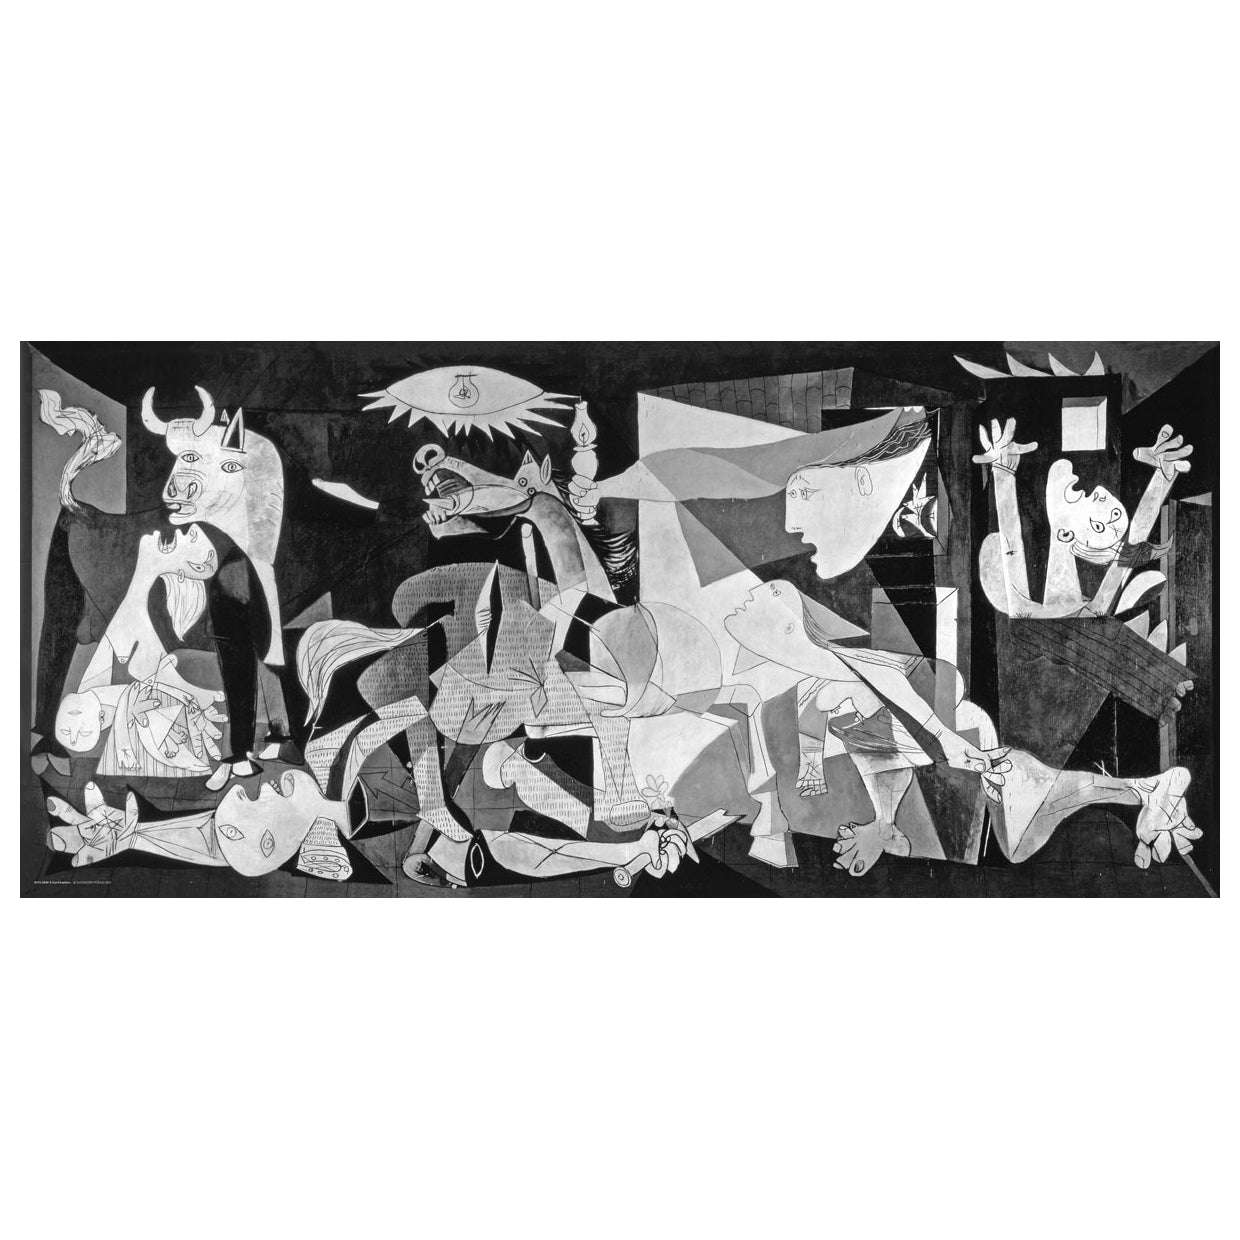 Picasso "Guernica" 1,000-piece Jigsaw Puzzle